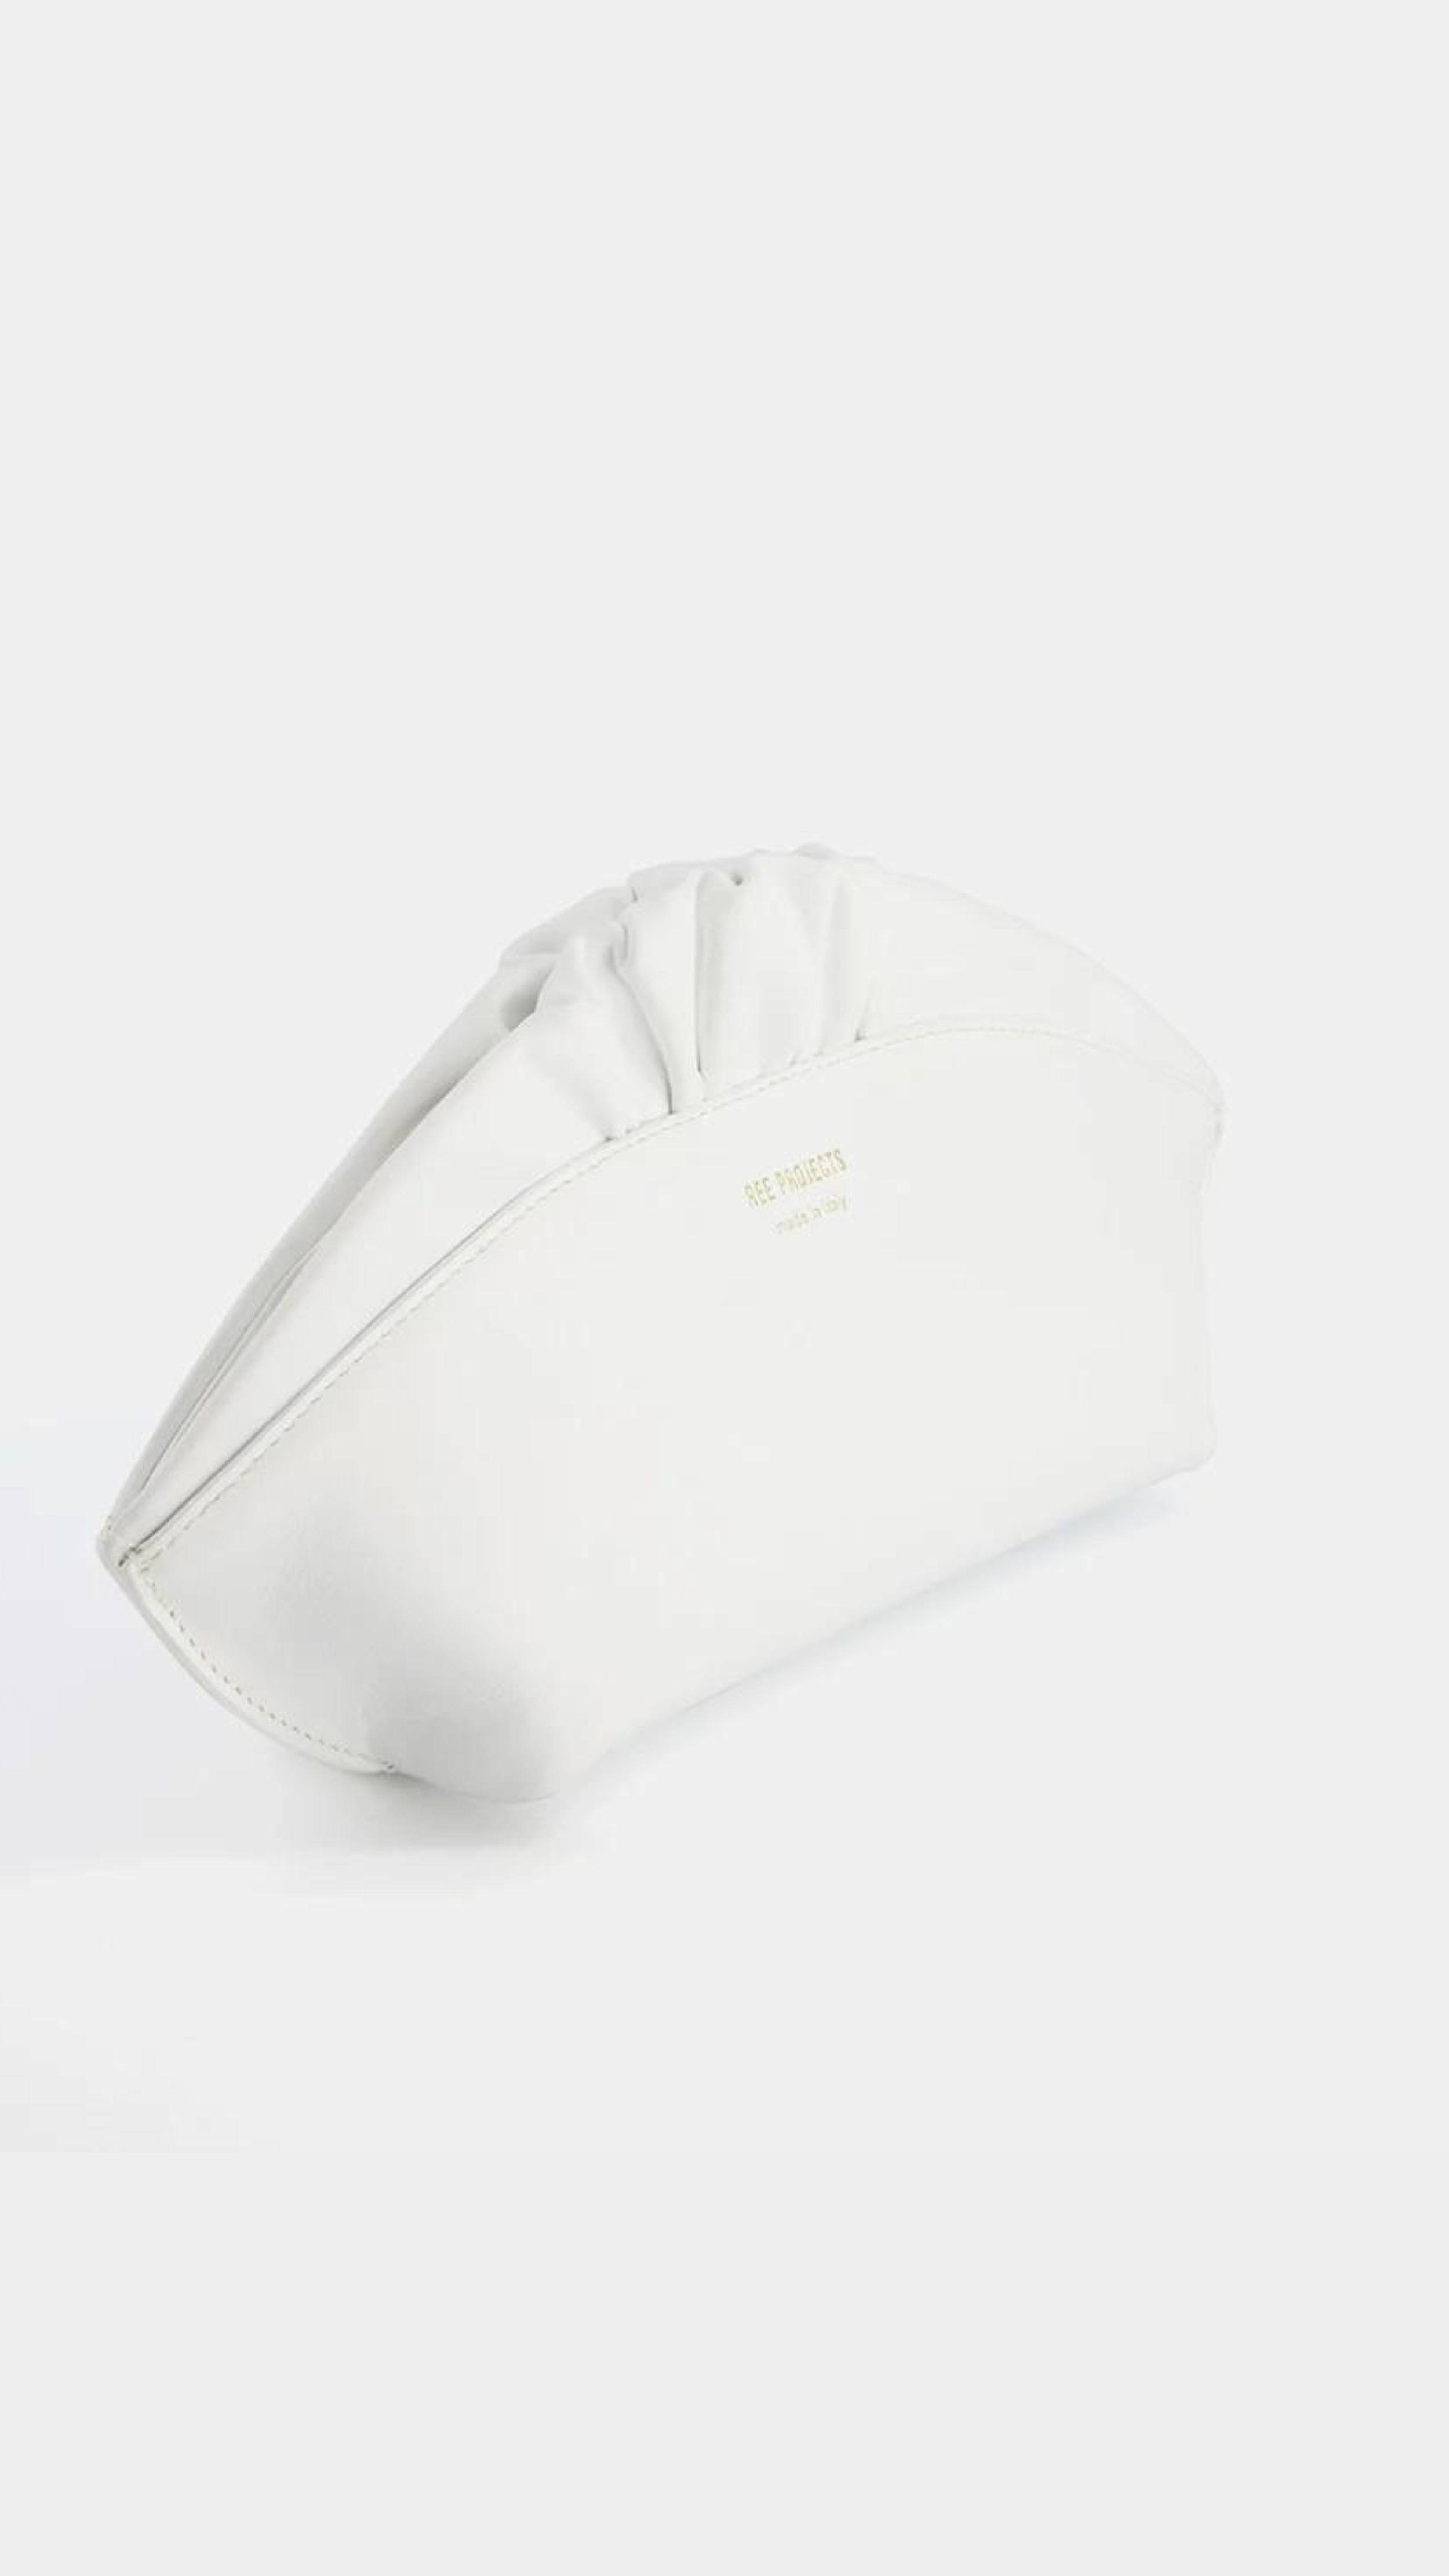 Ree Projects, Ann Baguettina in White. Made in the softest Italian leather this clutch style is perfect for any occasion. It has a slim curved top that is finished with a delicate ruffle and gold hardware. It features a strong magnetic closure and has internal straps to allow it to convert to a shoulder or crossbody bag.  Shown from side angle.